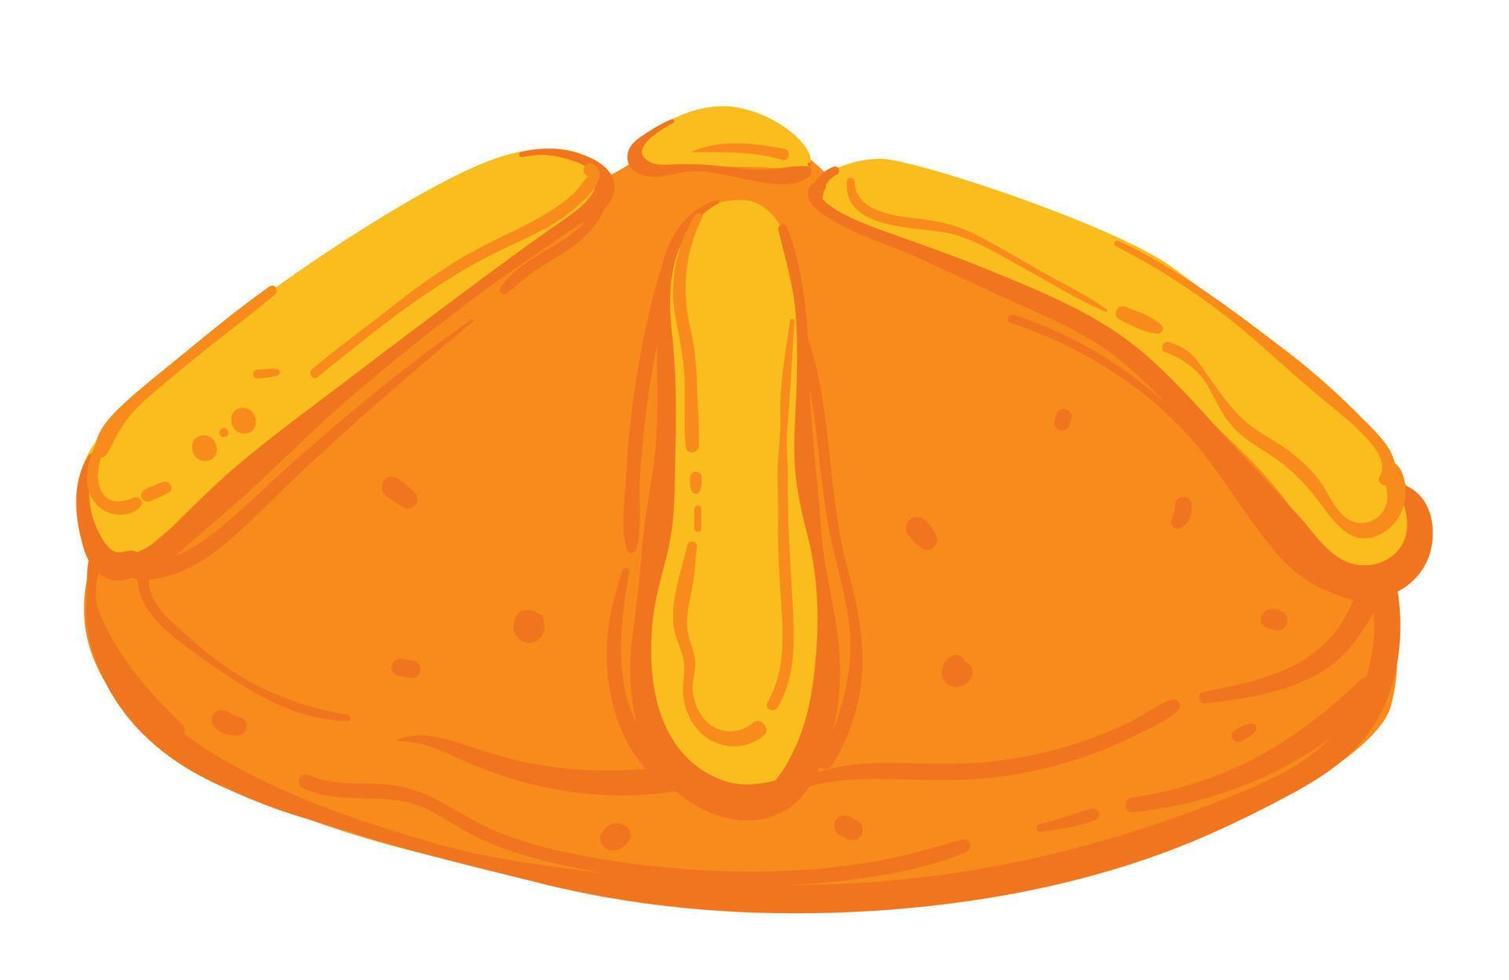 Pumpkin pie baked sweet dish for holidays vector